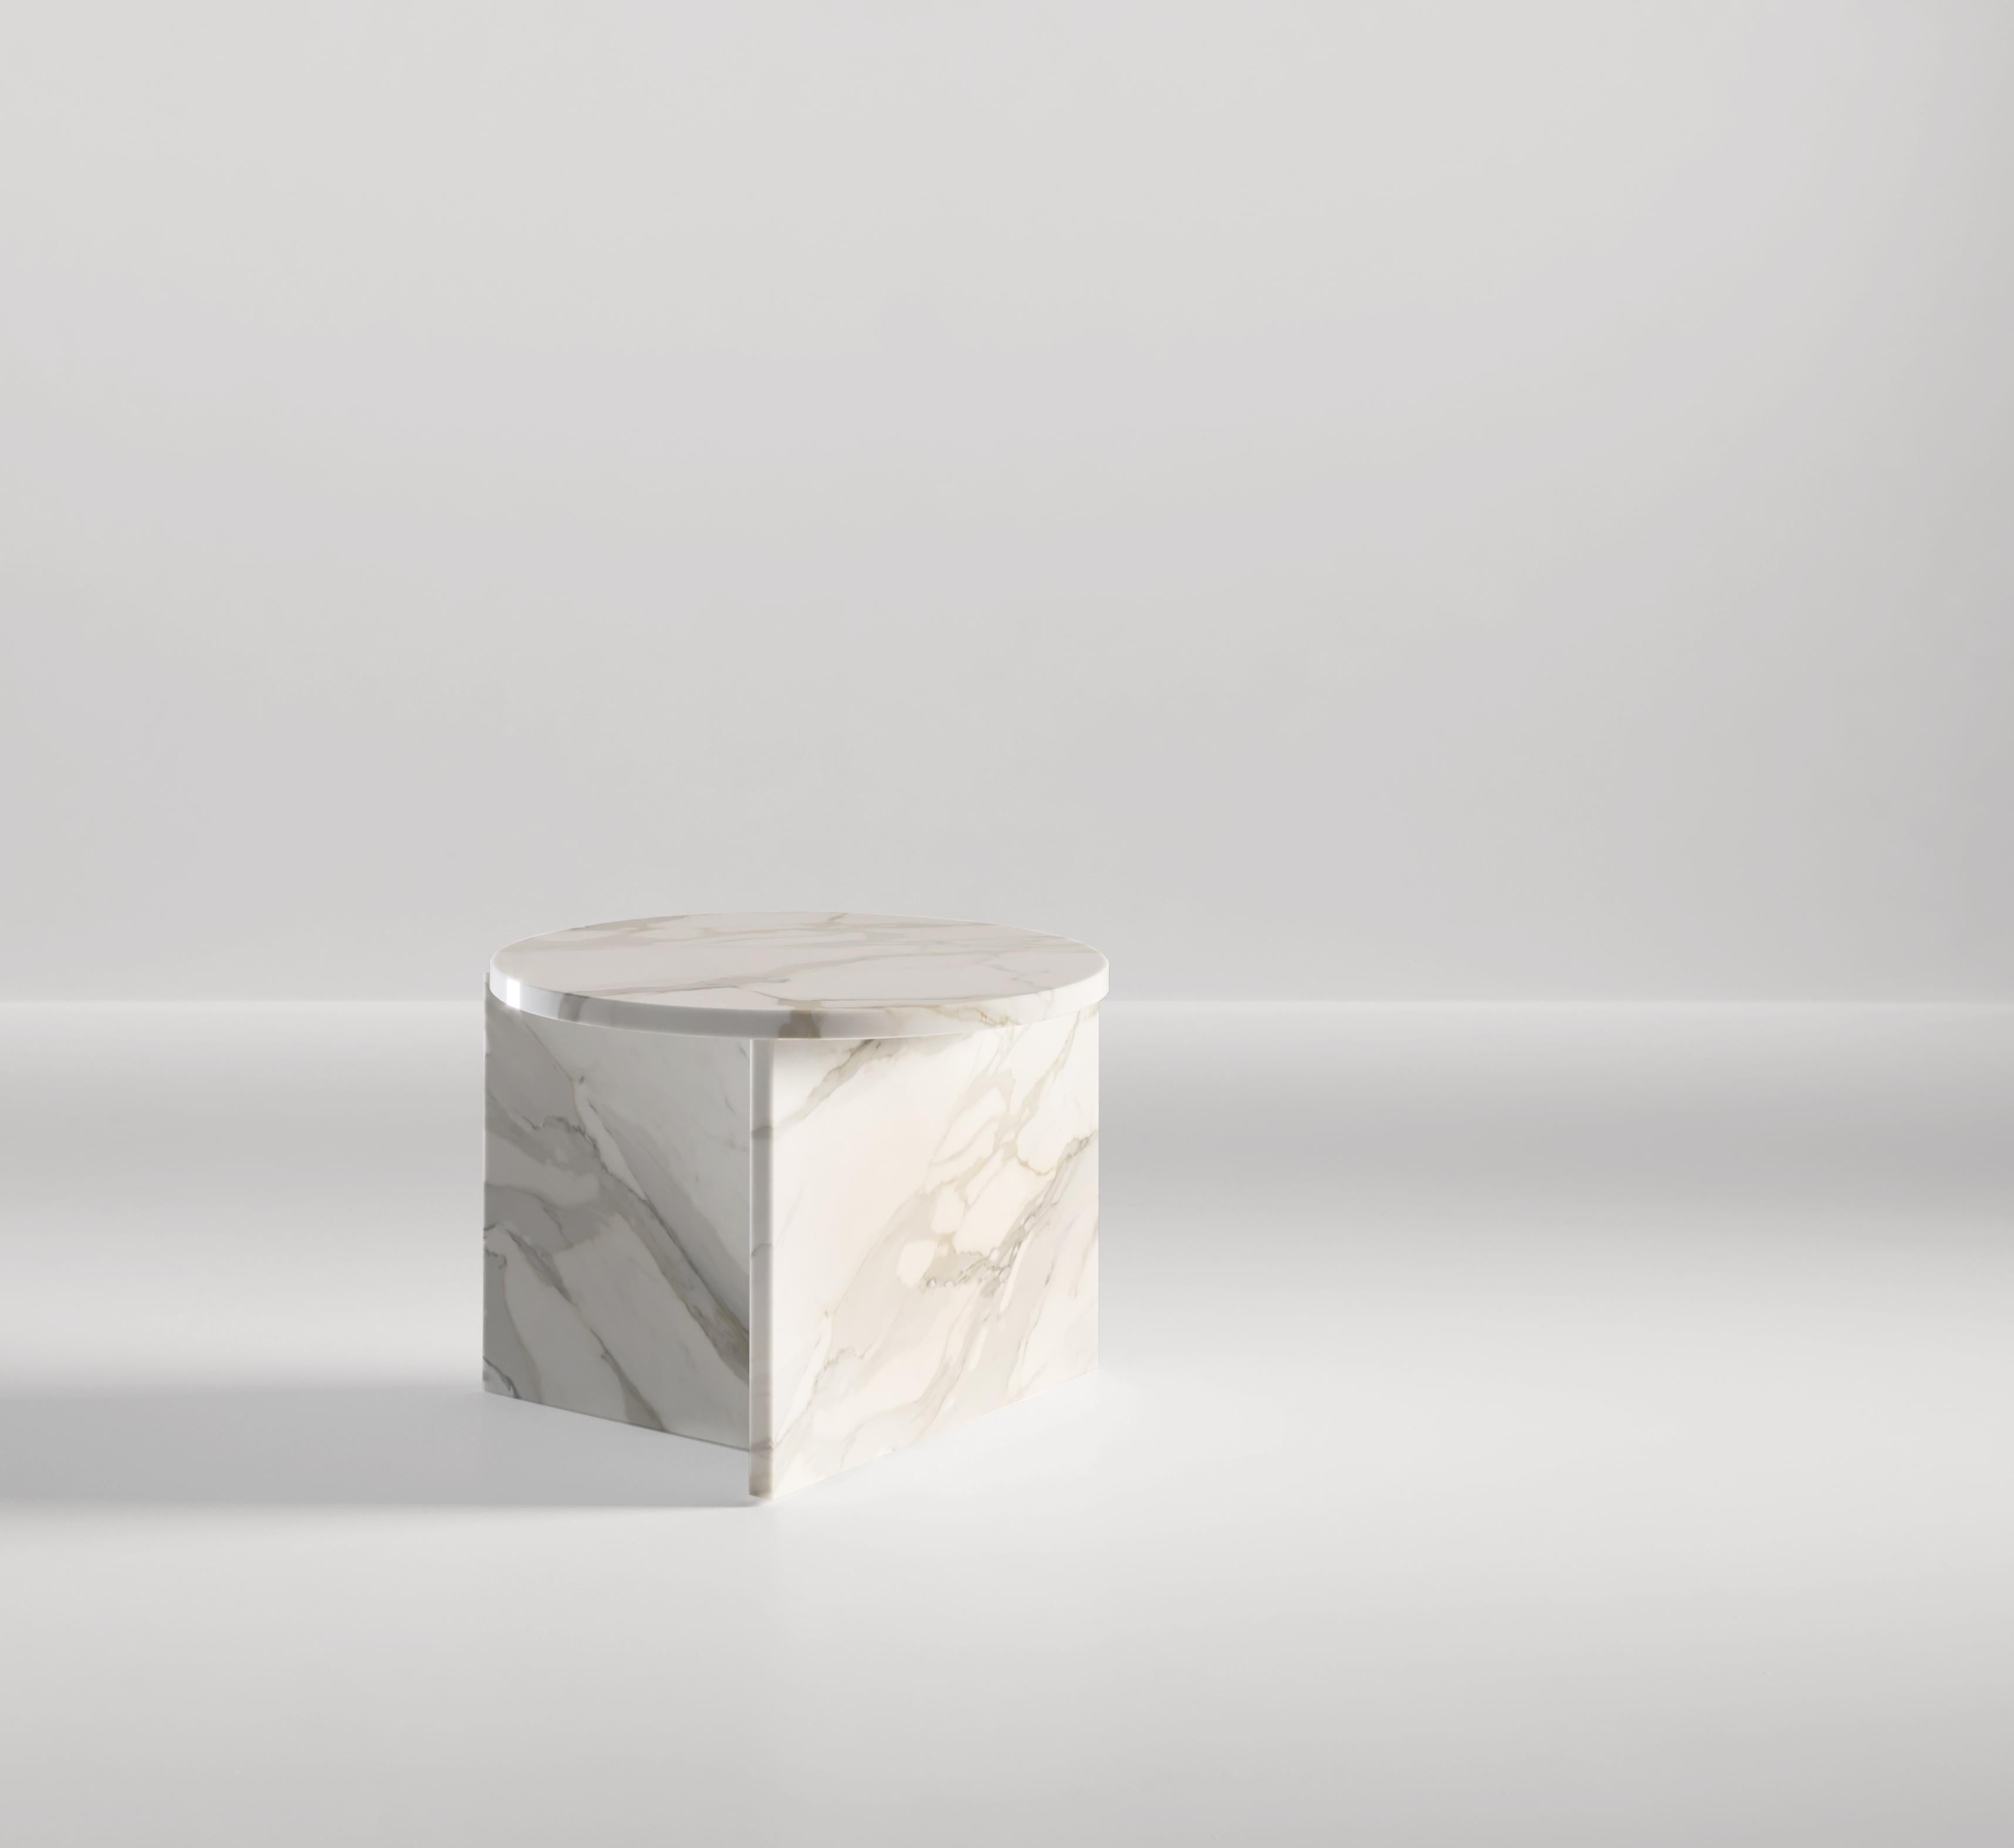 The Origin coffee tables are designed to showcase the beauty of natural stone. Two pieces of stone meet off-centre with the table top creating an entirely stone construction with no visible joints. The Origin tables are available in a number of